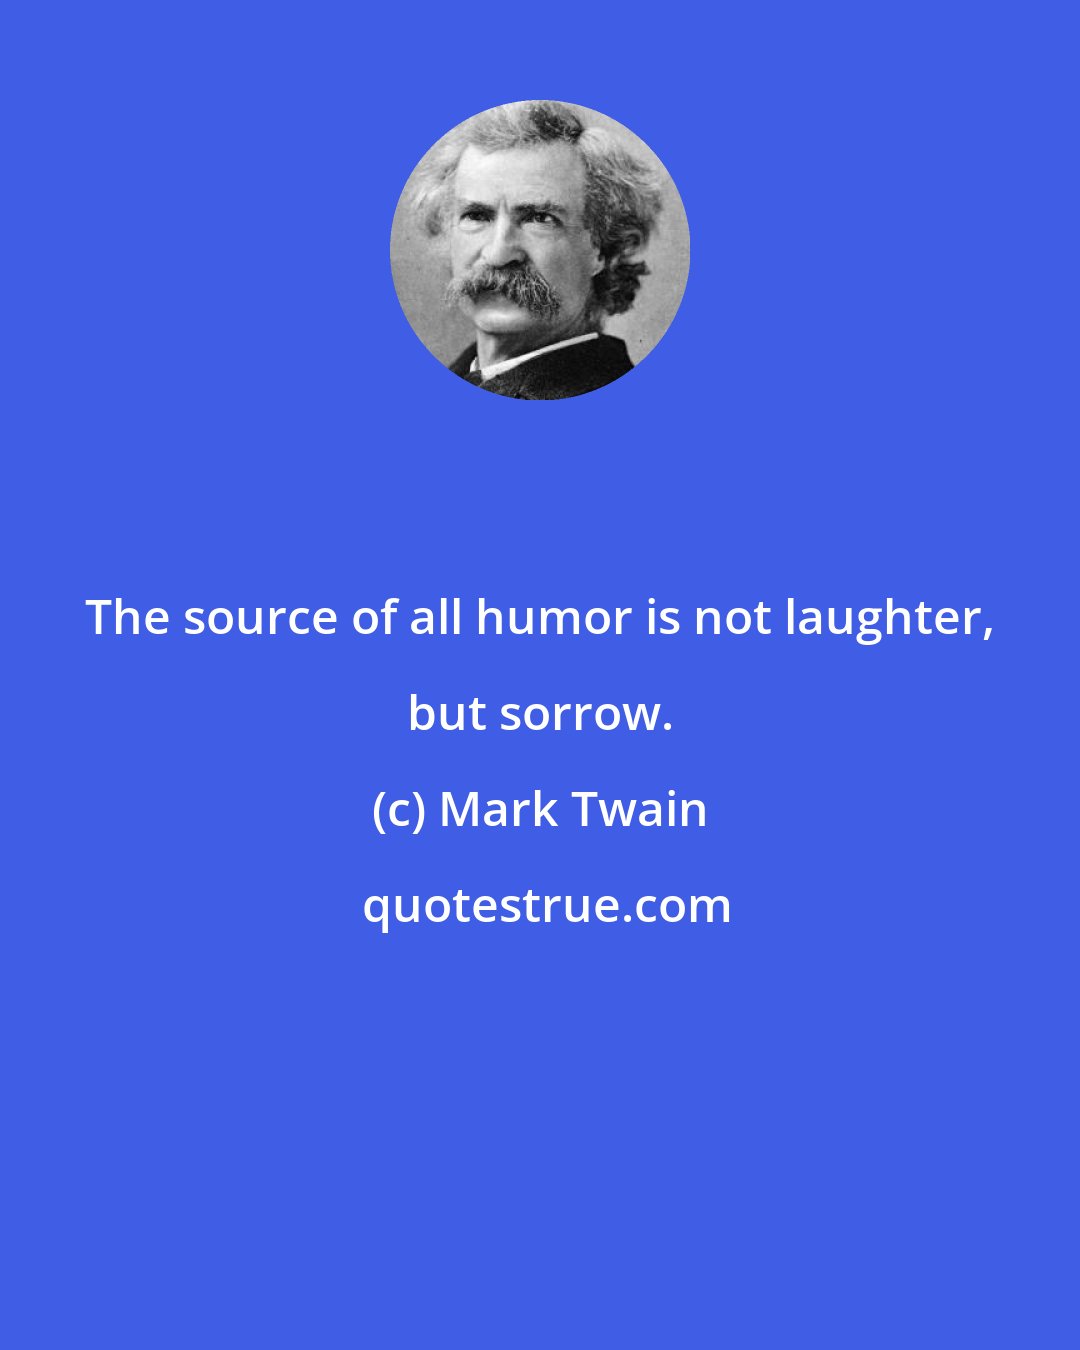 Mark Twain: The source of all humor is not laughter, but sorrow.